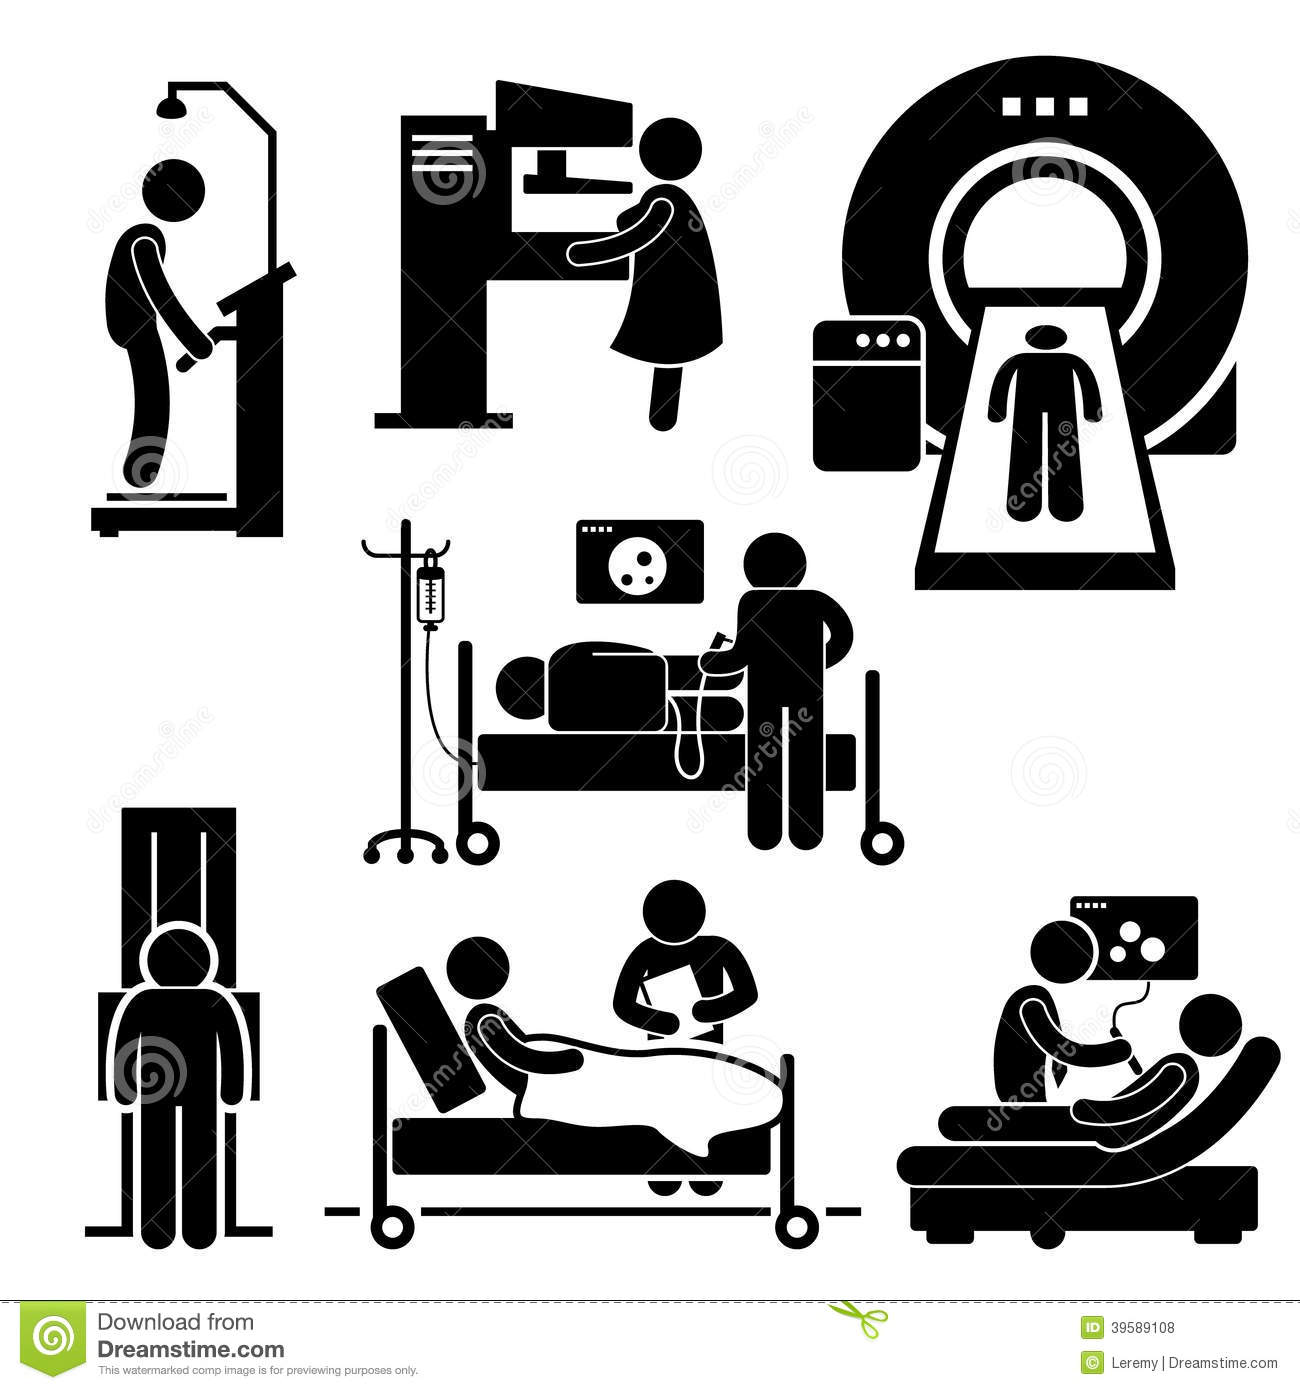 Ct scan clipart.